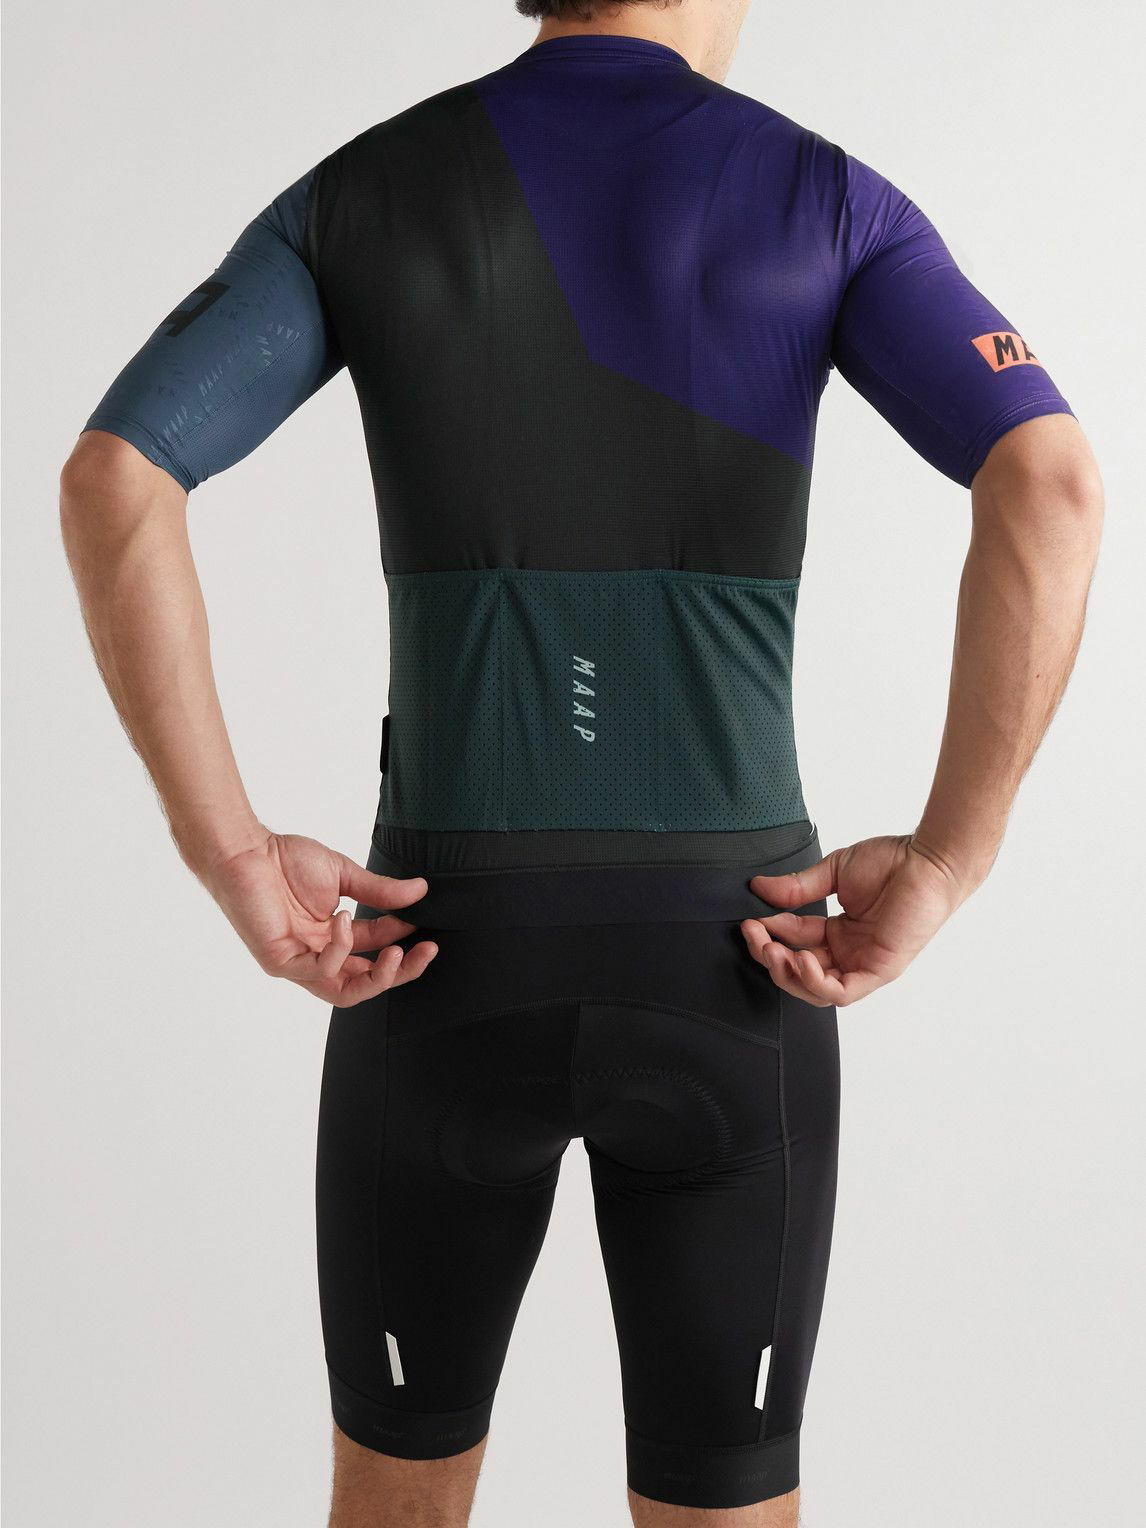 MAAP - Form Pro Hex Recycled Stretch-Mesh Cycling Jersey - Purple MAAP